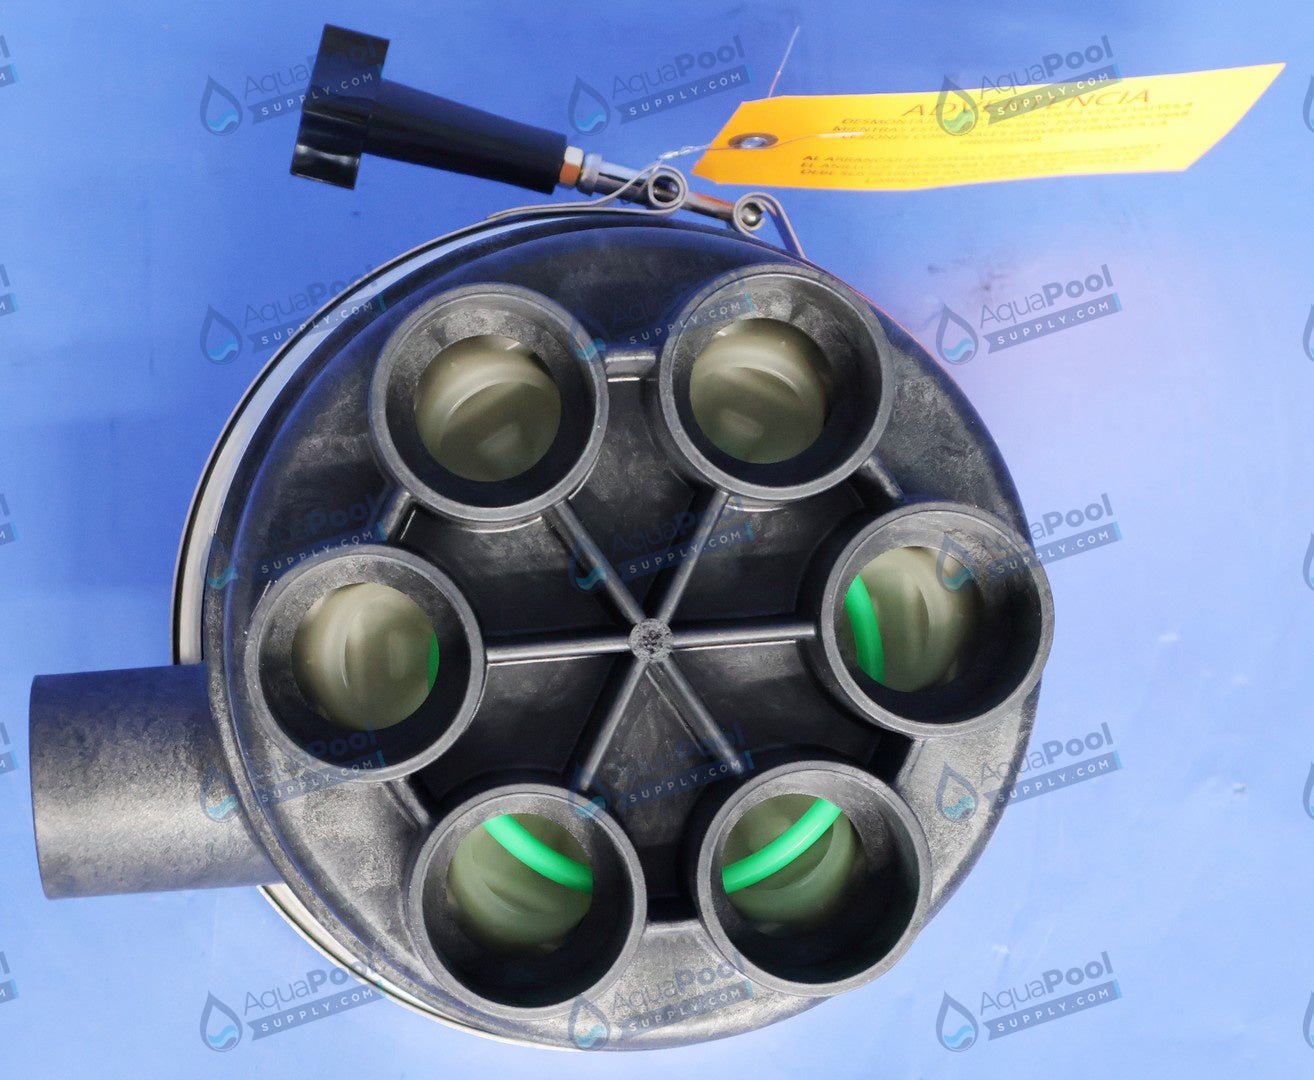 Pentair In-Floor (A&A) 1 1/2'' 6-Port Low Profile T-Valve Complete 224470 540218 - In Floor Cleaning System Valves - img-4